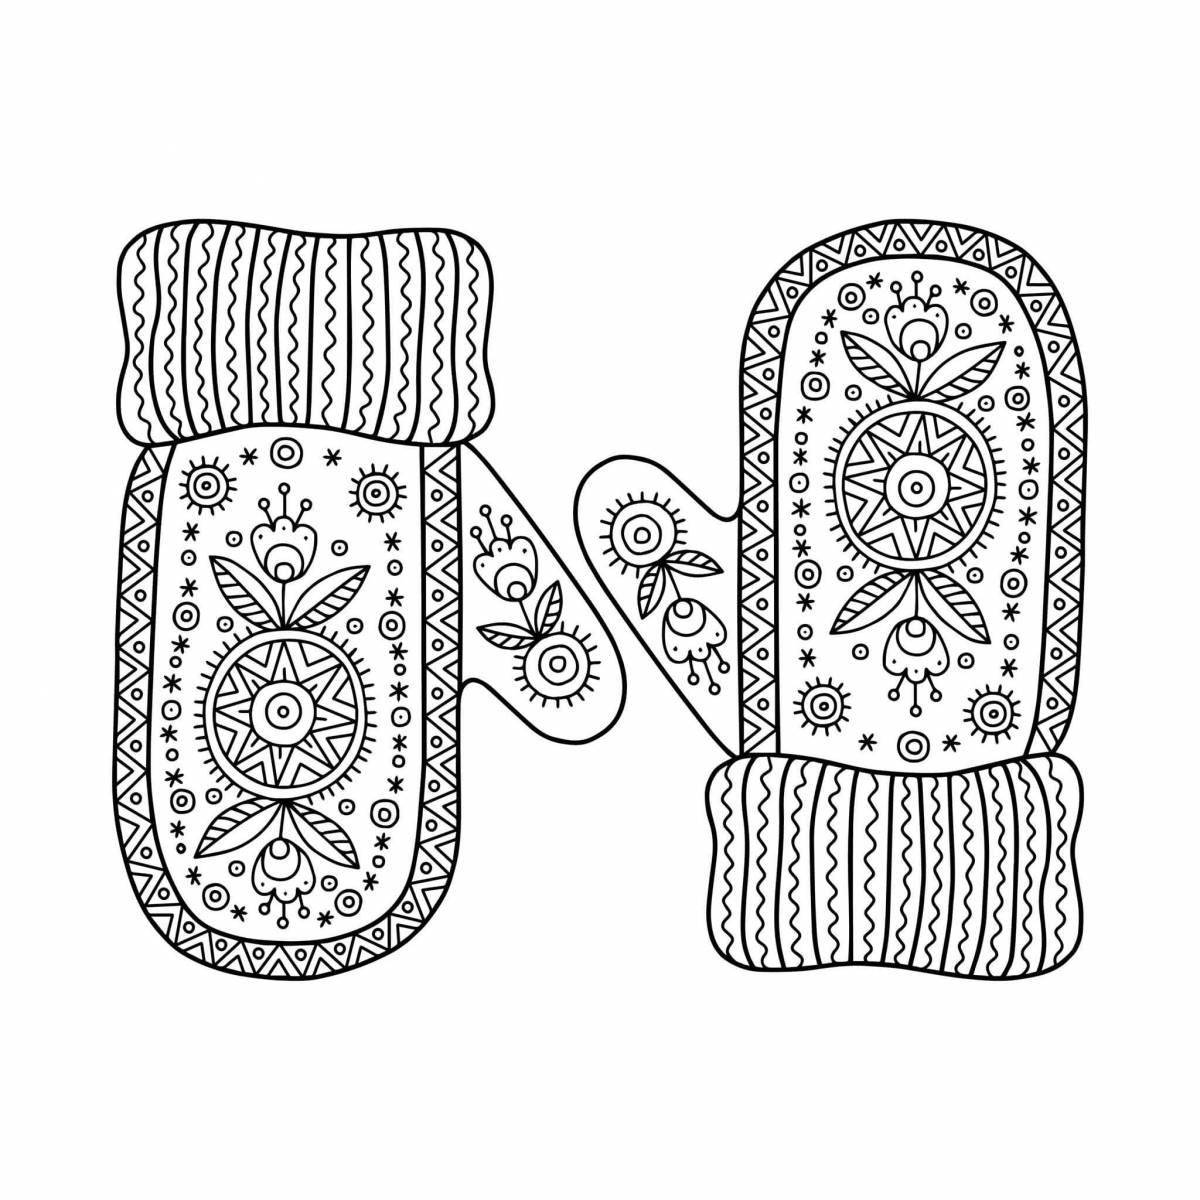 Patterned mittens for kids #12